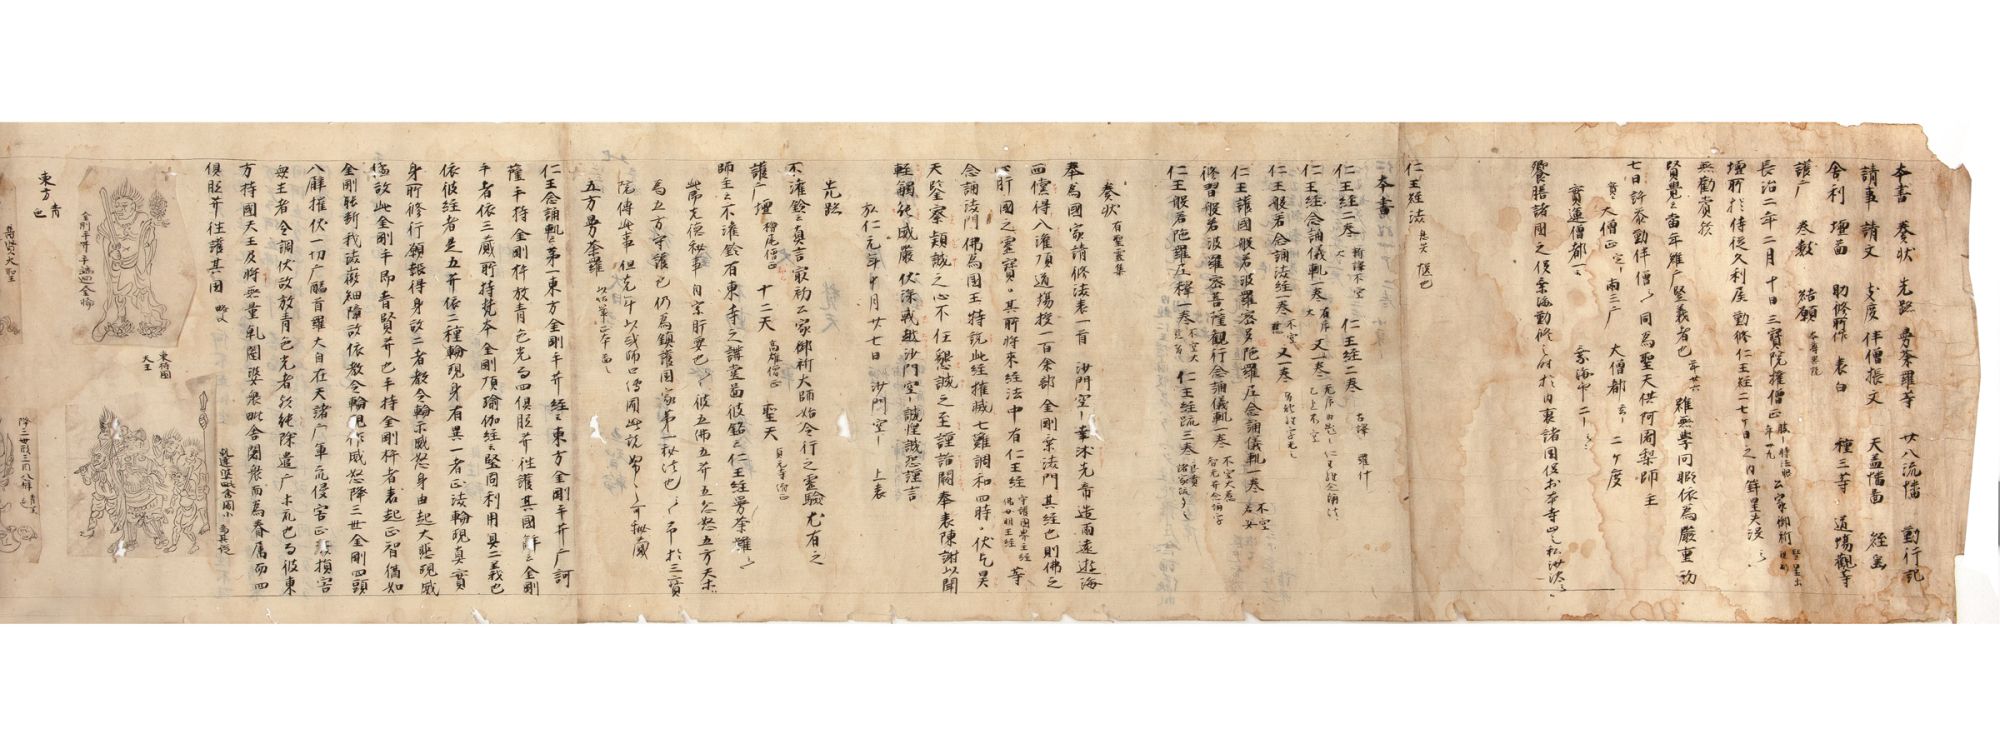 Handscroll on paper, entitled partially defective , at beginning of scroll  on outside, “Ninnō kyōhō Hyakkan no uchi Daigoji” “Doctrine of the Sutra 